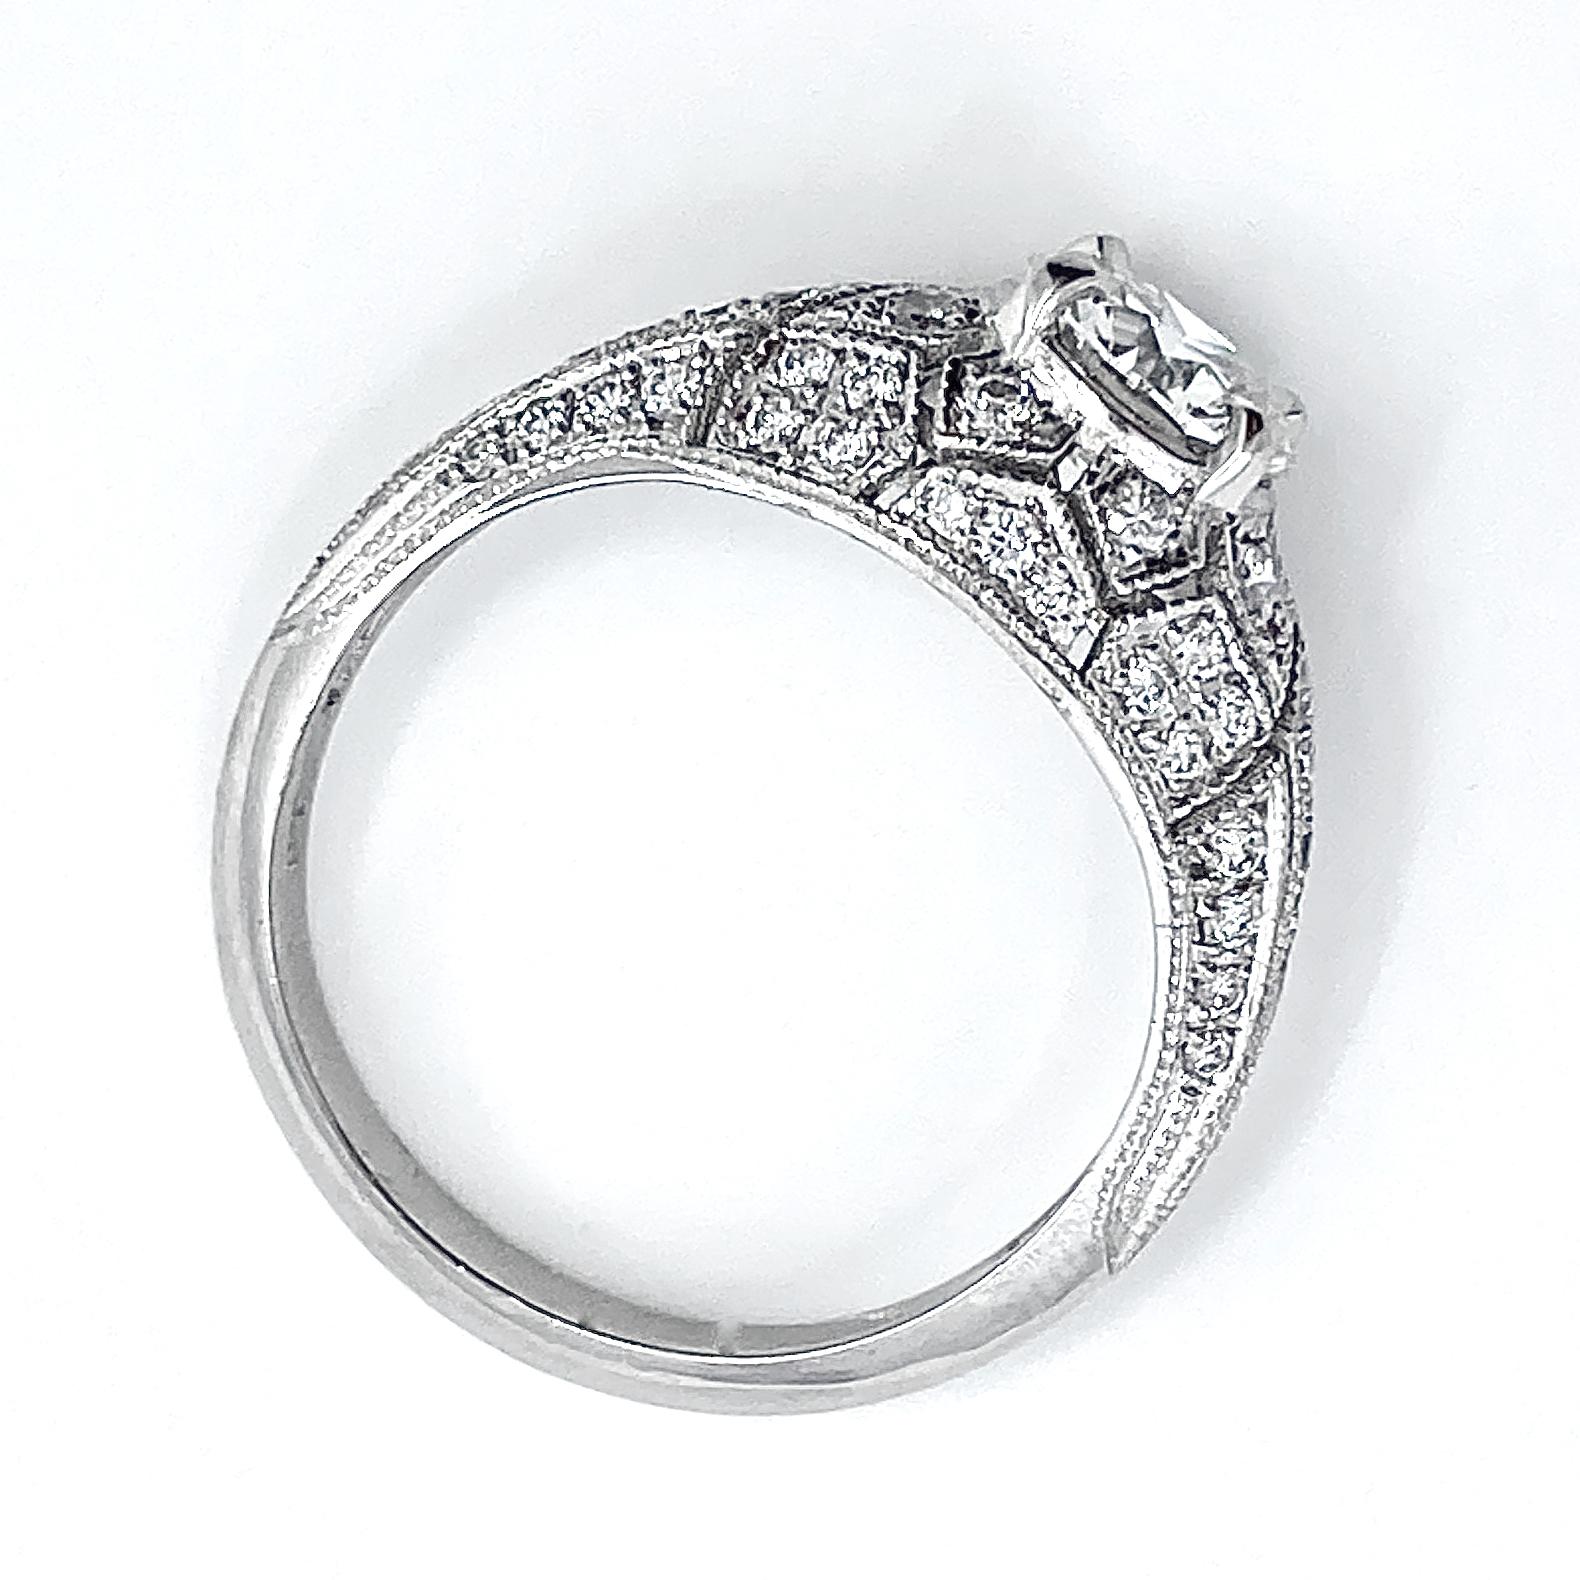 GIA Certified H/VS2 1.03 Carat Diamond in Bombe Edwardian-Style Platinum Ring In New Condition For Sale In Sherman Oaks, CA